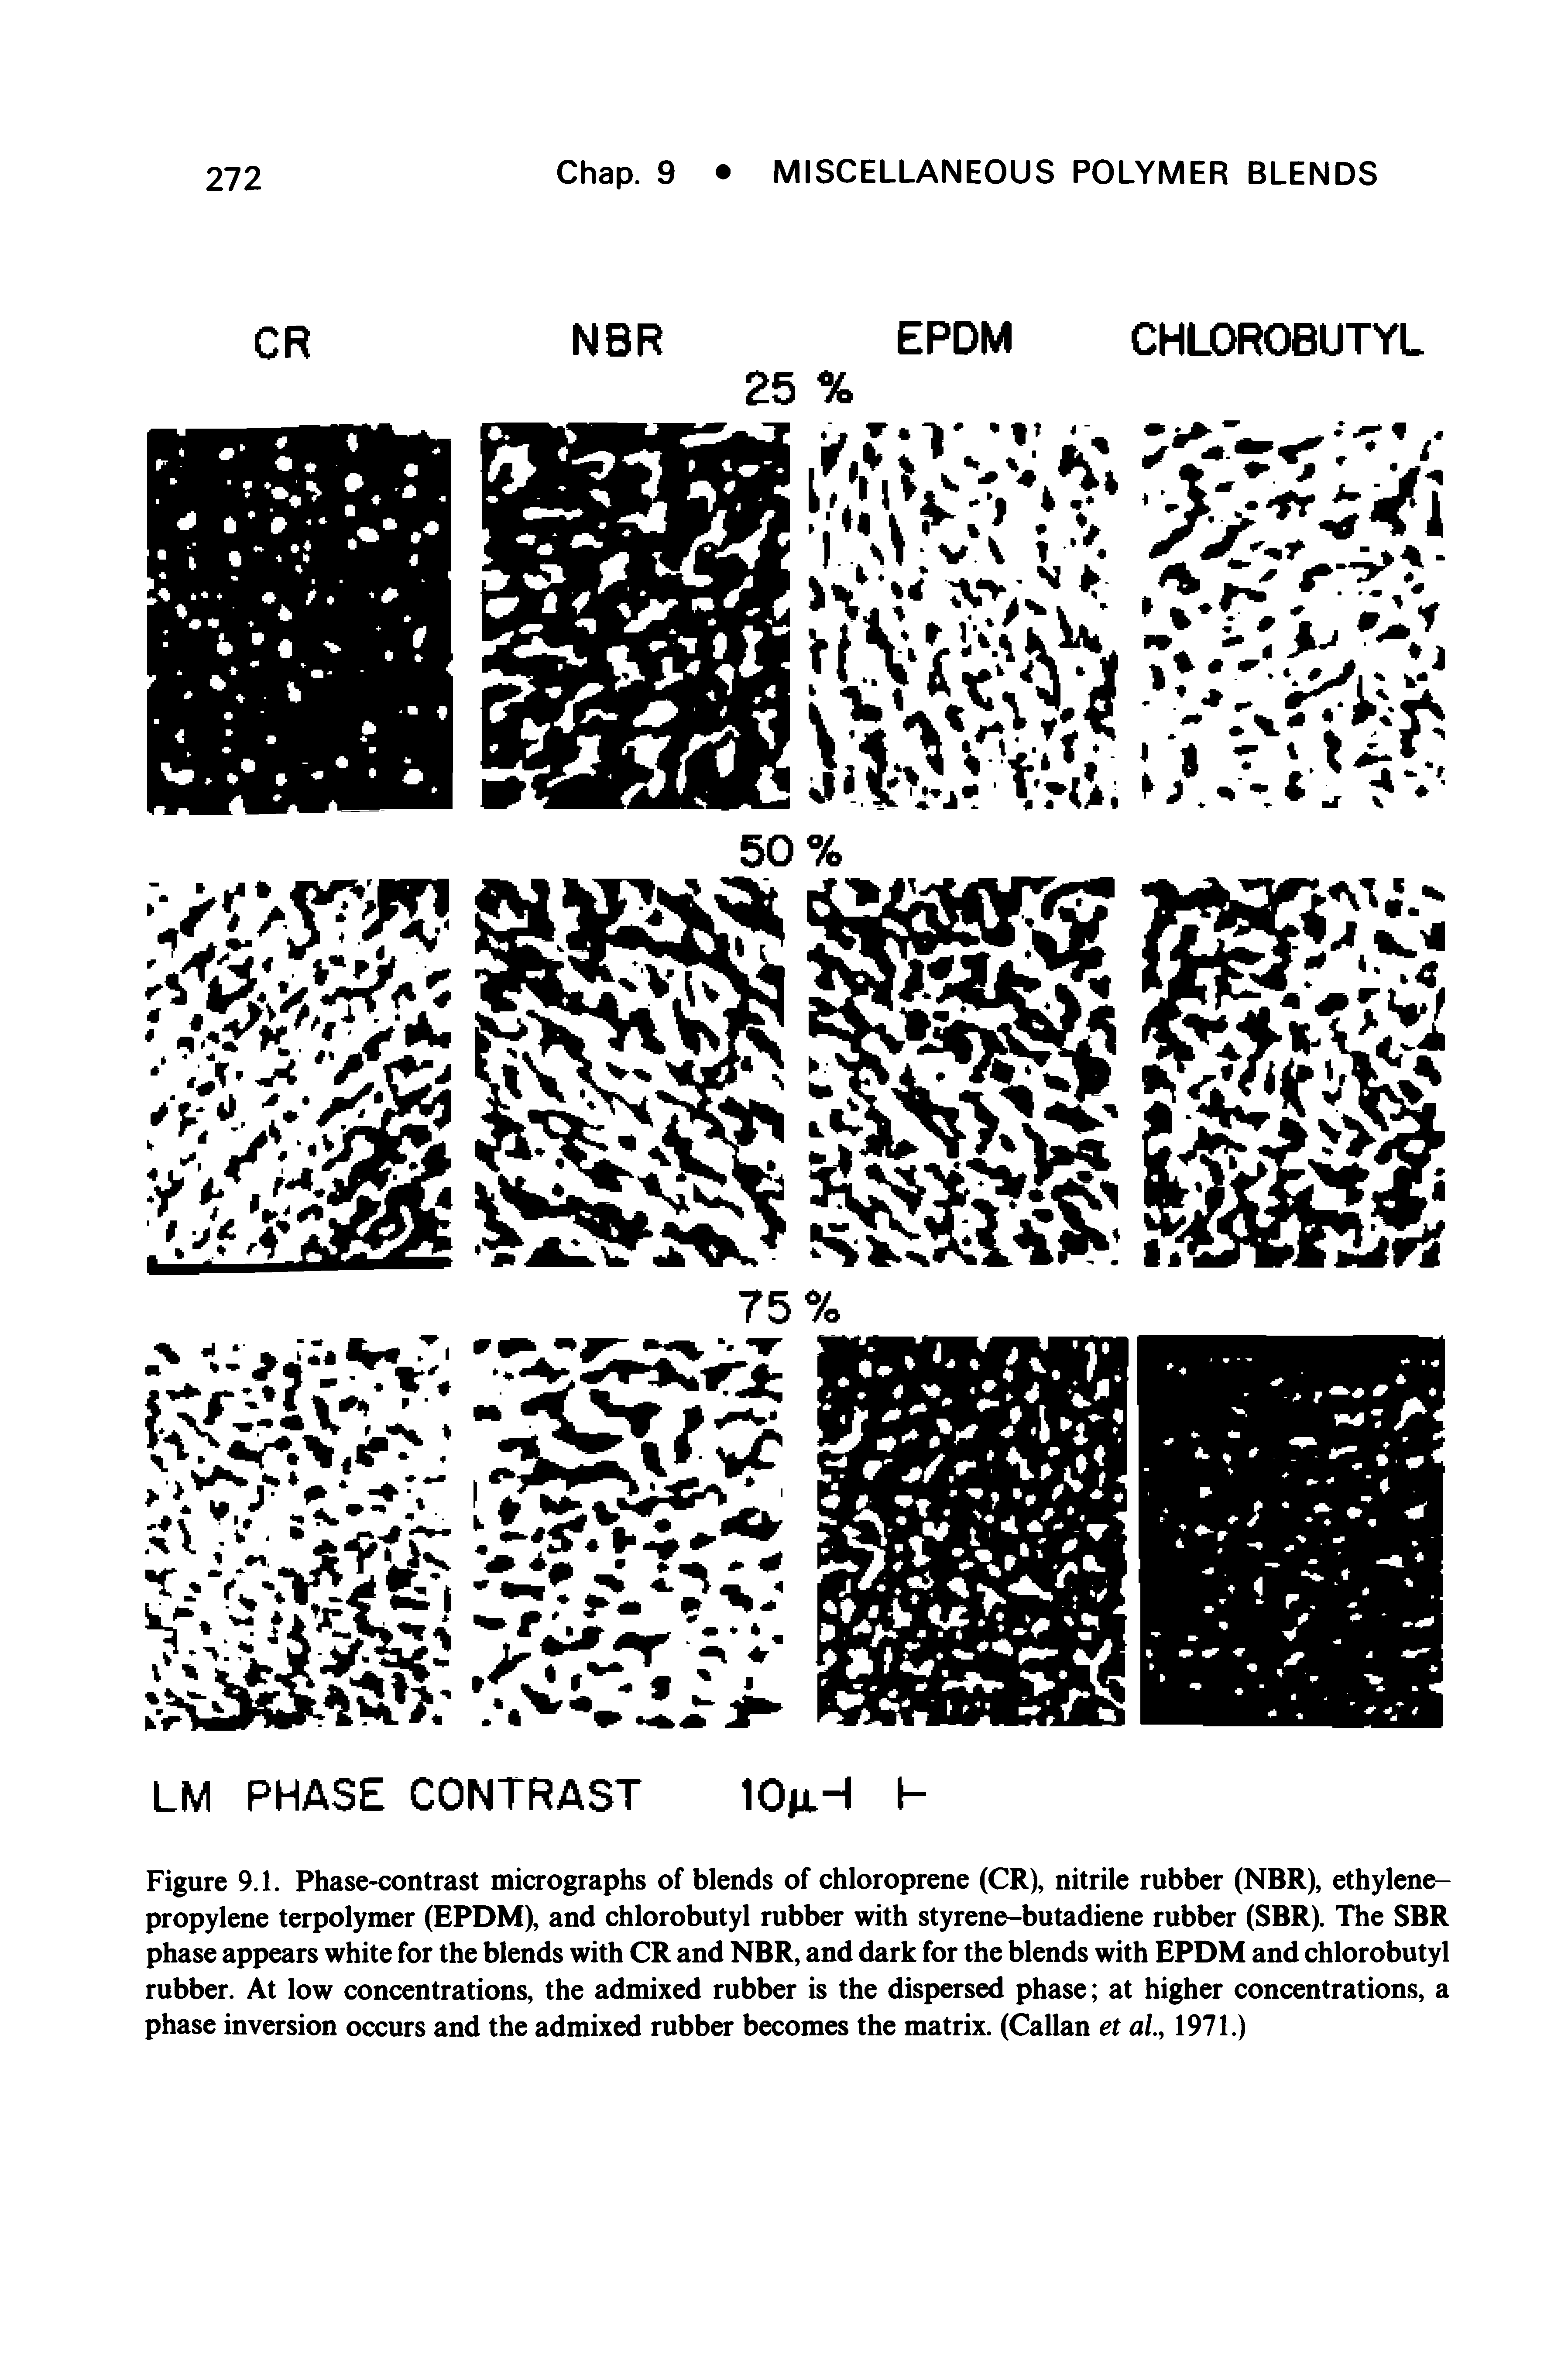 Figure 9.1. Phase-contrast micrographs of blends of chloroprene (CR), nitrile rubber (NBR), ethylene-propylene terpolymer (EPDM), and chlorobutyl rubber with styrene-butadiene rubber (SBR). The SBR phase appears white for the blends with CR and NBR, and dark for the blends with EPDM and chlorobutyl rubber. At low concentrations, the admixed rubber is the dispersed phase at higher concentrations, a phase inversion occurs and the admixed rubber becomes the matrix. (Callan et al, 1971.)...